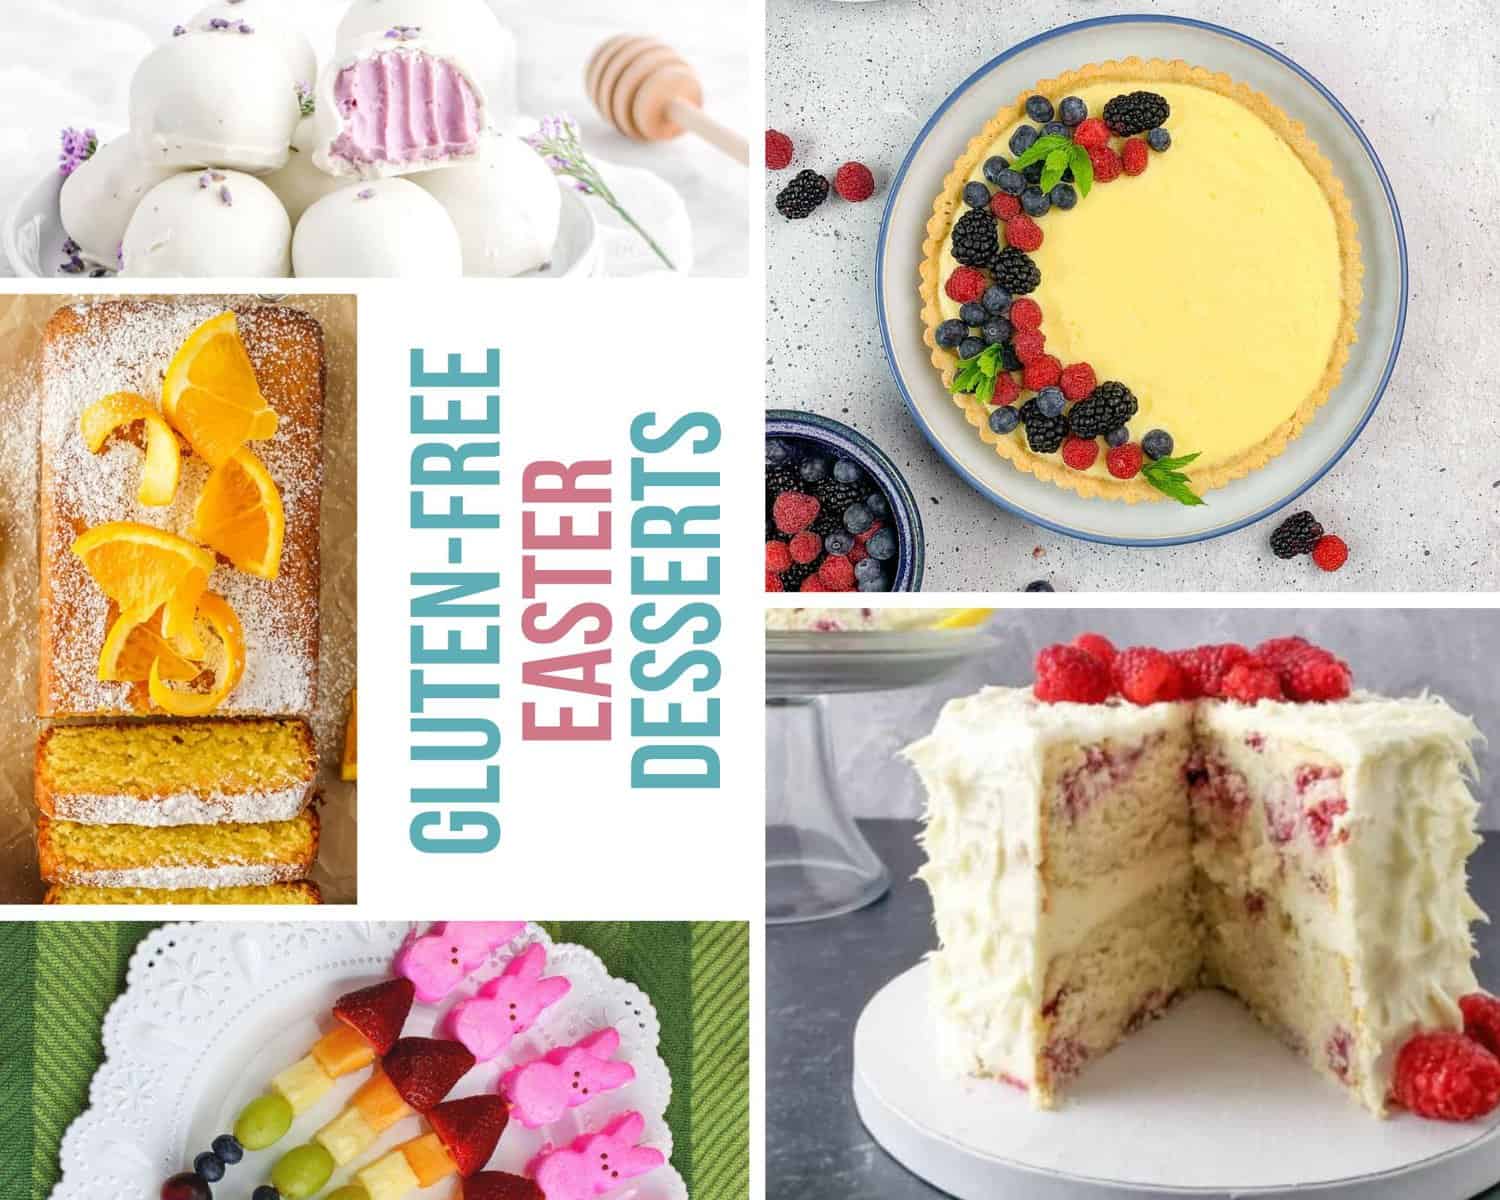 Text in center (sideways): Gluten-Free Easter Desserts. Photos (clockwise from top left): gluten-free lavender white-chocolate truffles and one with a bite missing showing lavender creme filling, lemon tart covered with berries, raspberry lemon cake with a slice missing showing lemon frosting between layers and raspberries mixed into the cake and raspberries on top, fruit skewers with grapes, pineapple, cantaloupe, strawberries and pink bunny peeps on top, orange olive oil cake with a few slices cut and sliced oranges on top